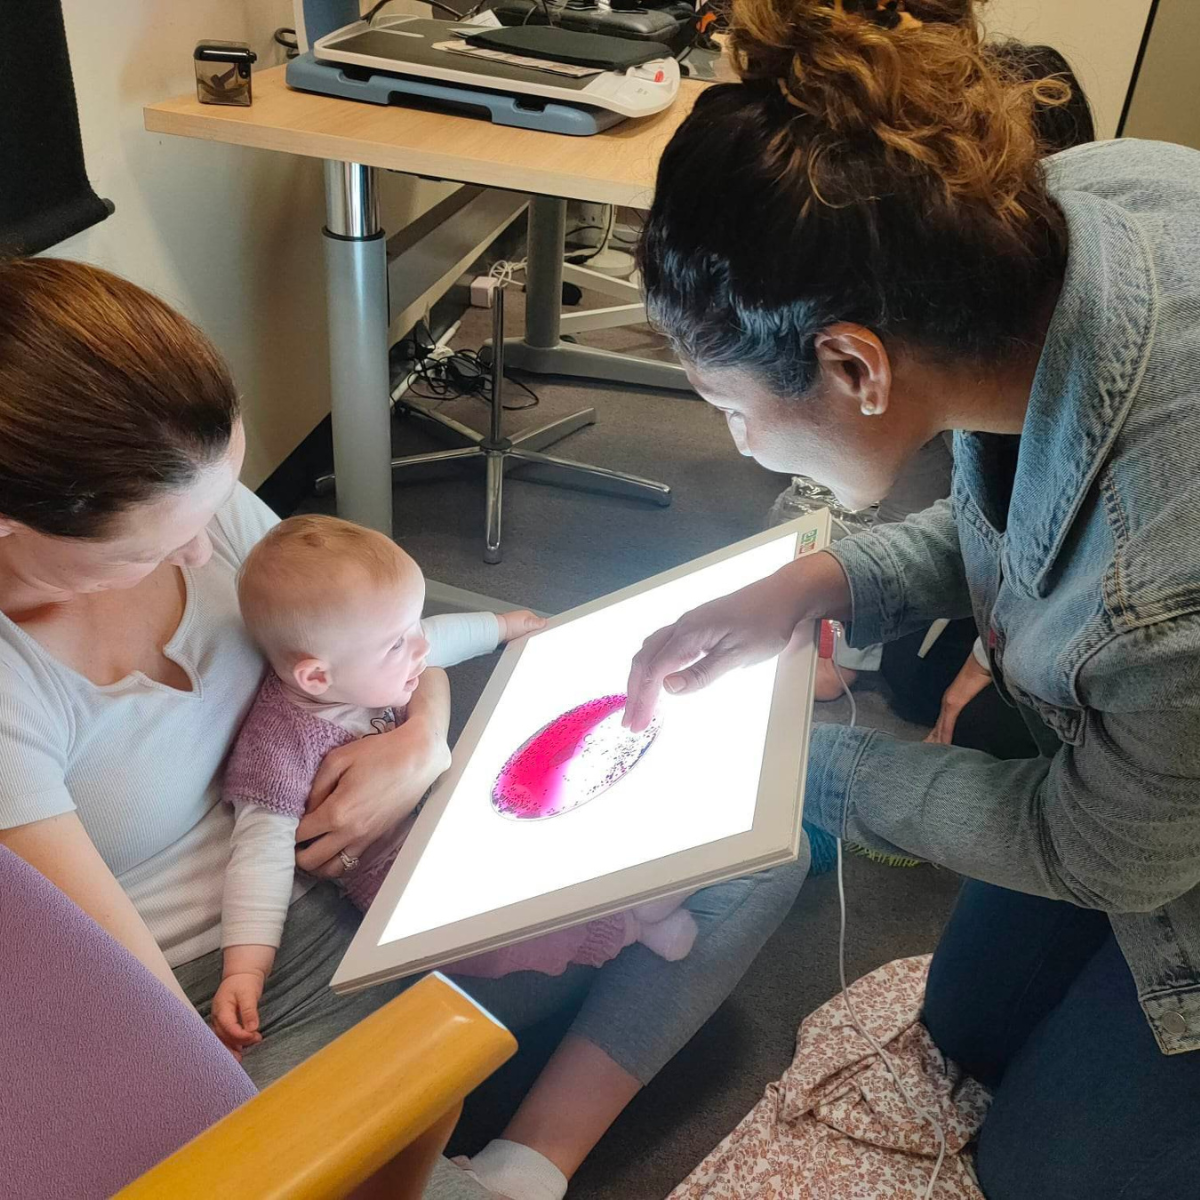 "Bonnie held by her mother as they look at a backlit screen held by a Vision Australia staff member who si holding a pink toy over it"